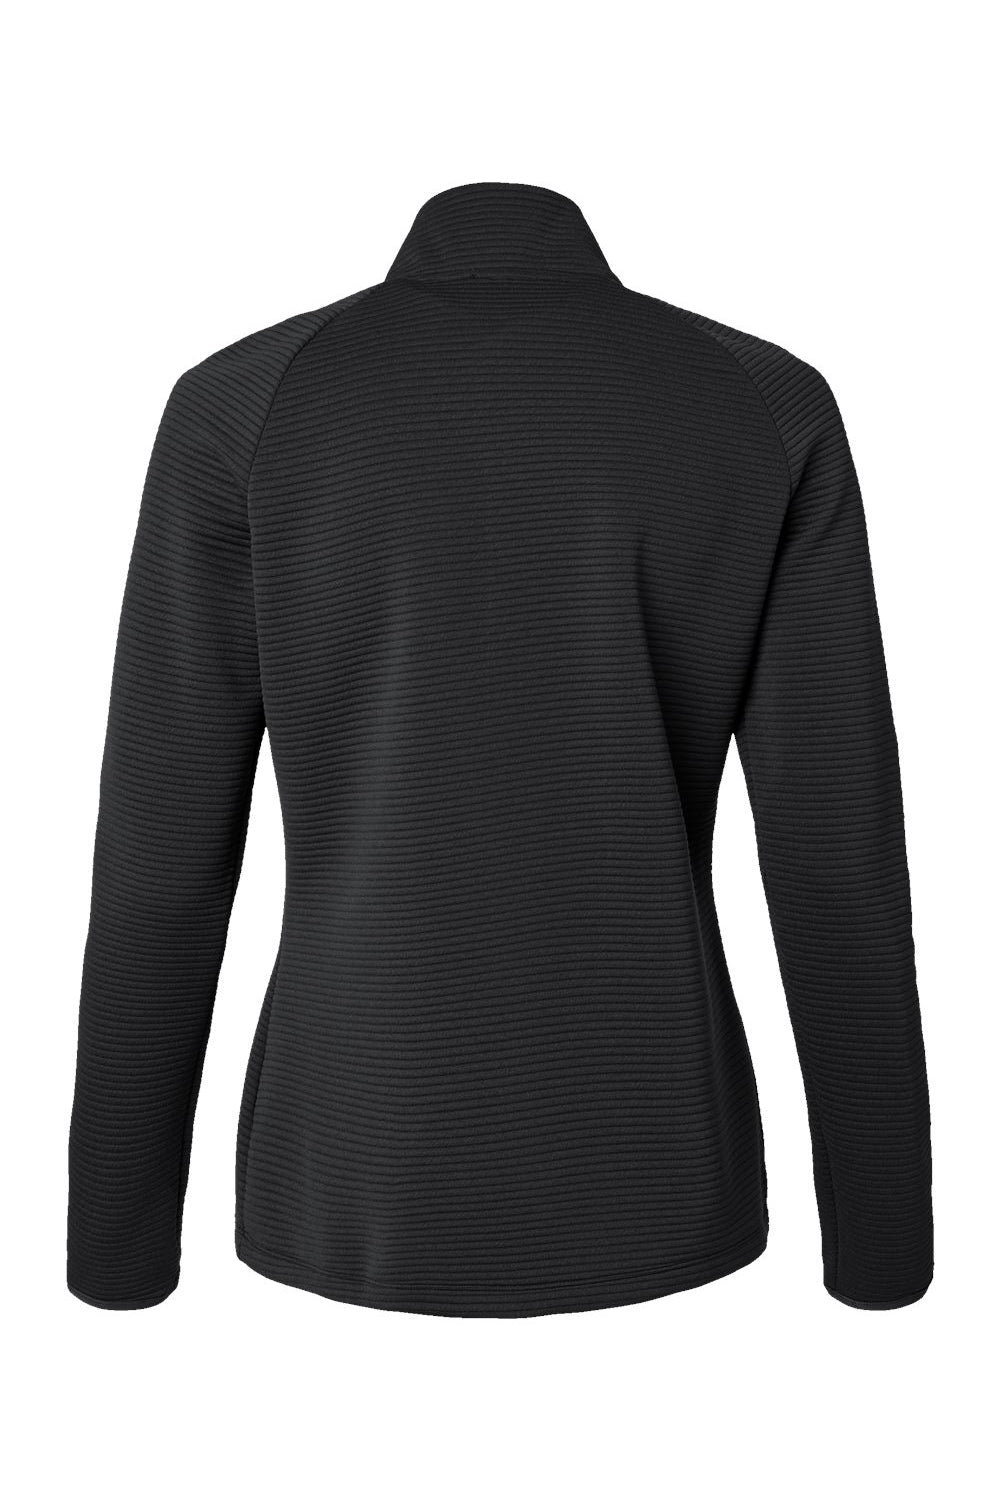 Adidas A589 Womens Spacer 1/4 Zip Pullover Black Flat Back